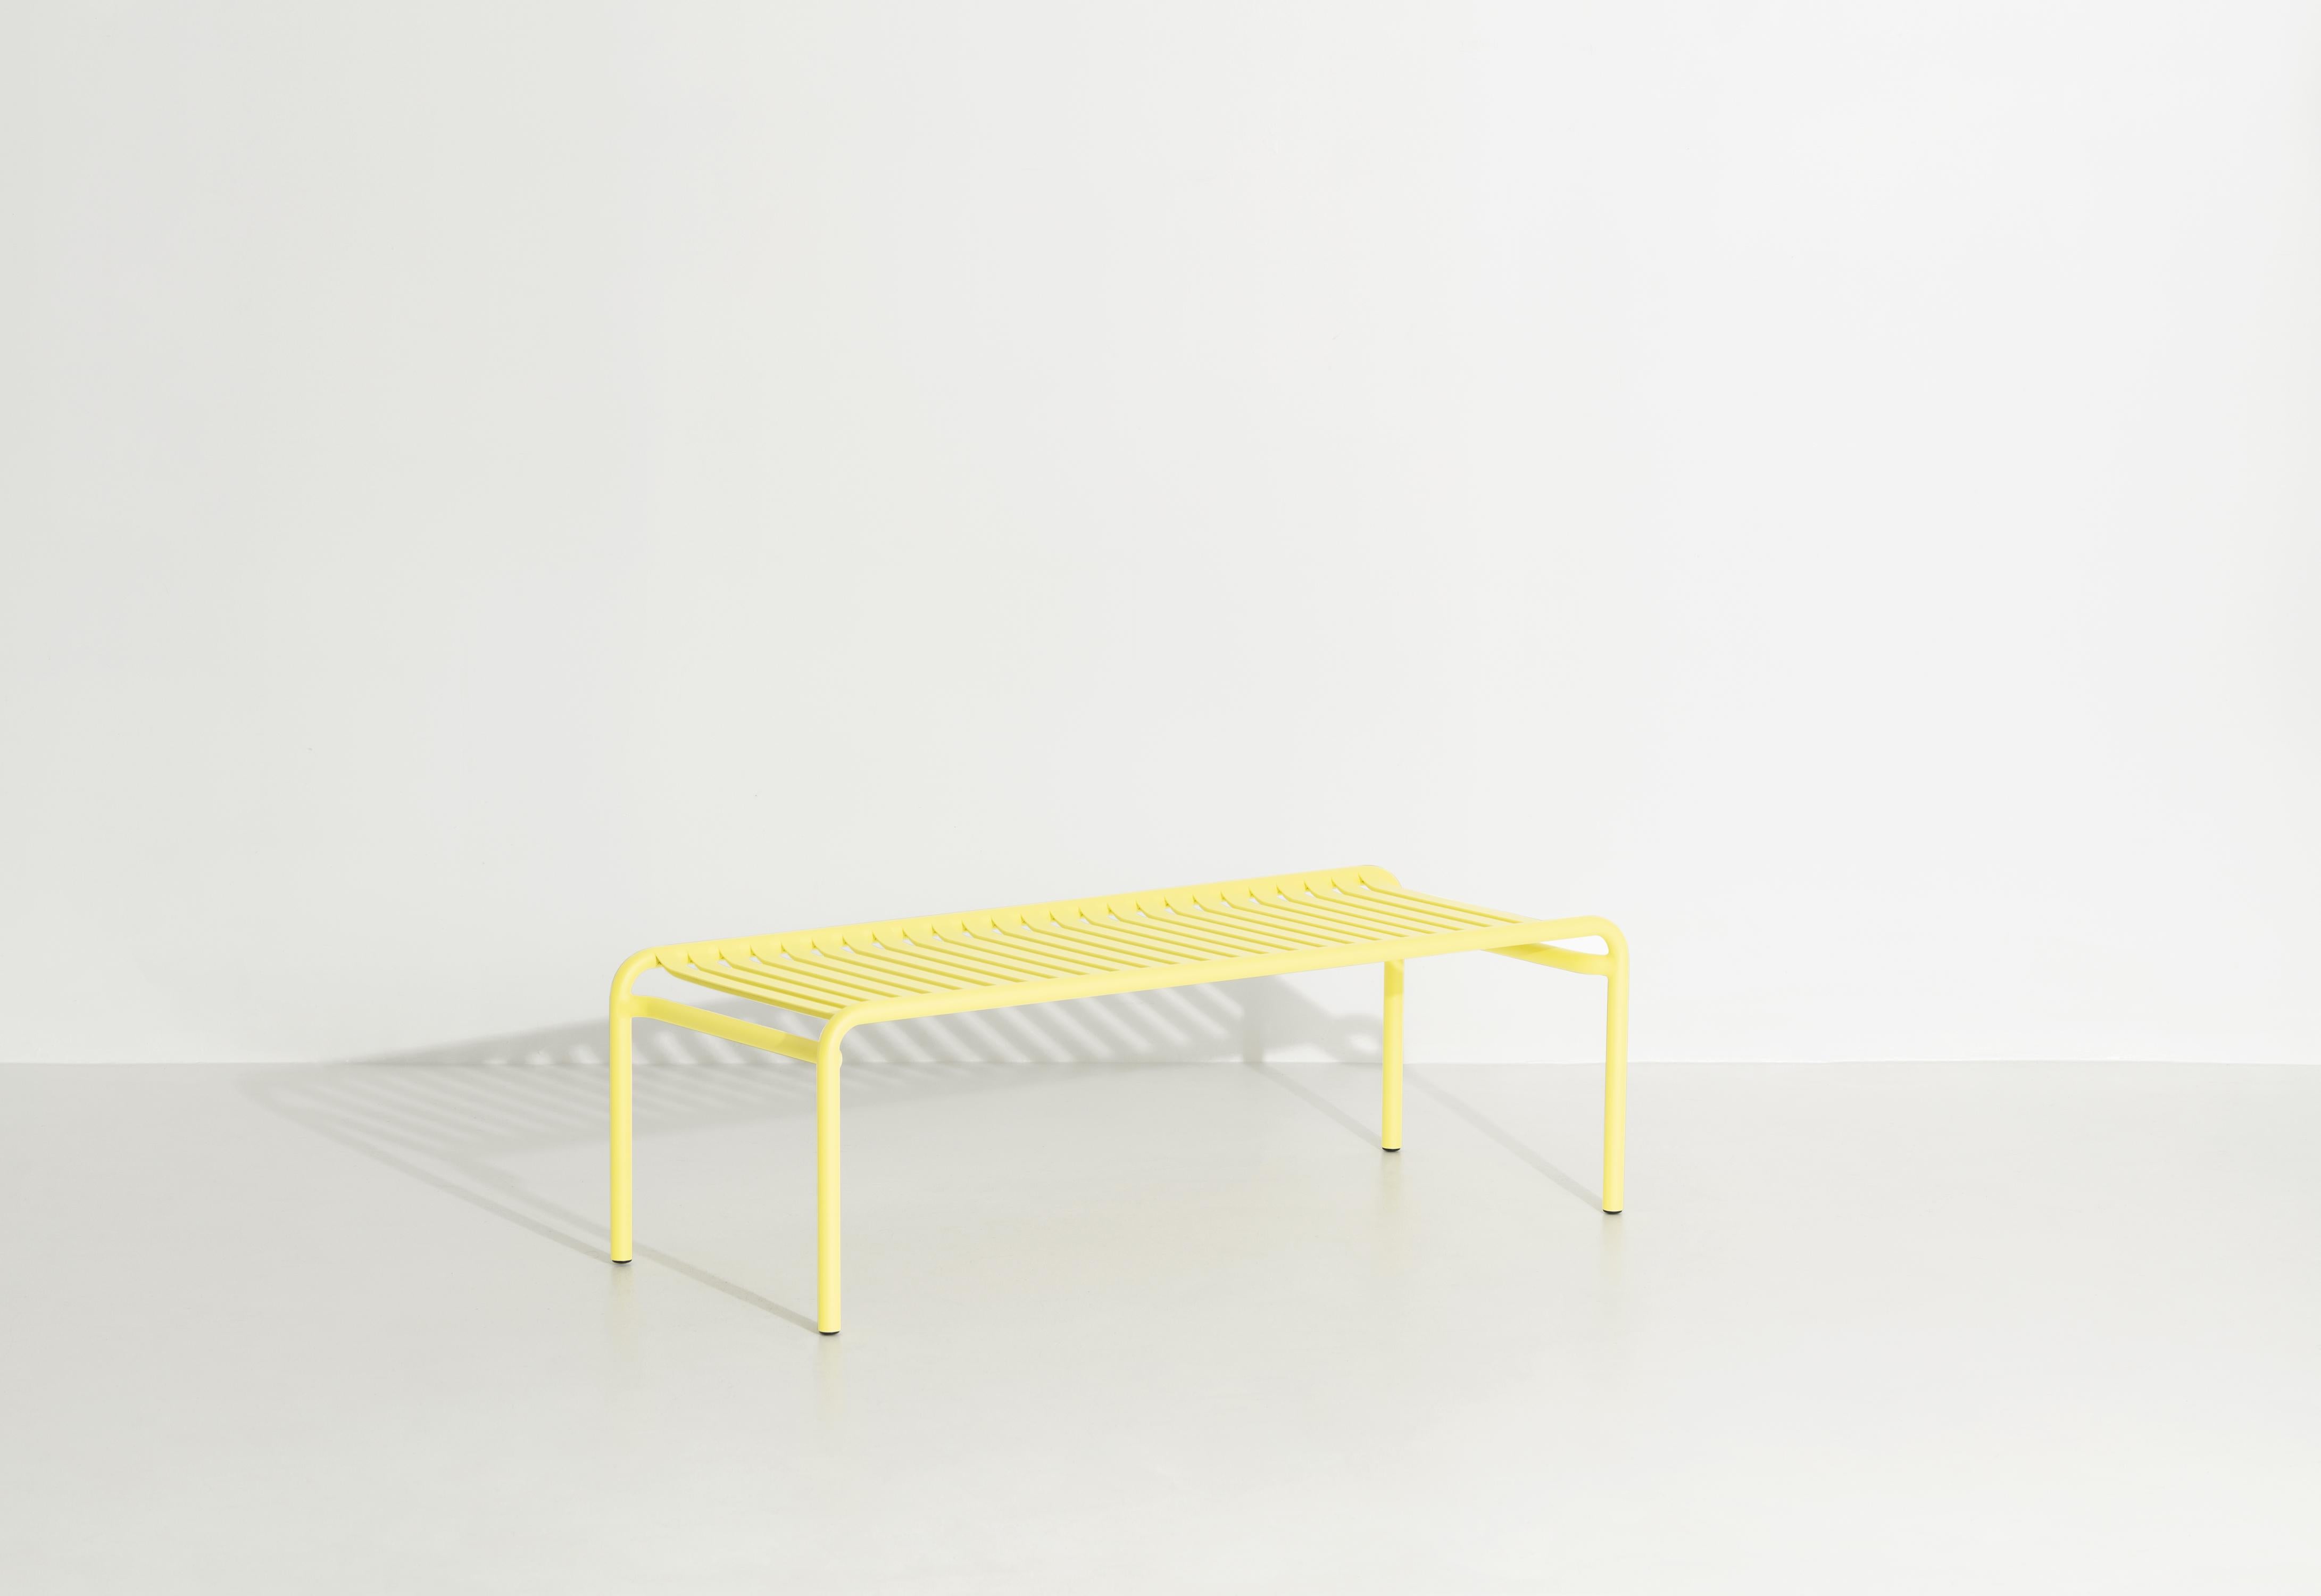 Chinese Petite Friture Week-End Long Coffee Table in Yellow Aluminium, 2017 For Sale